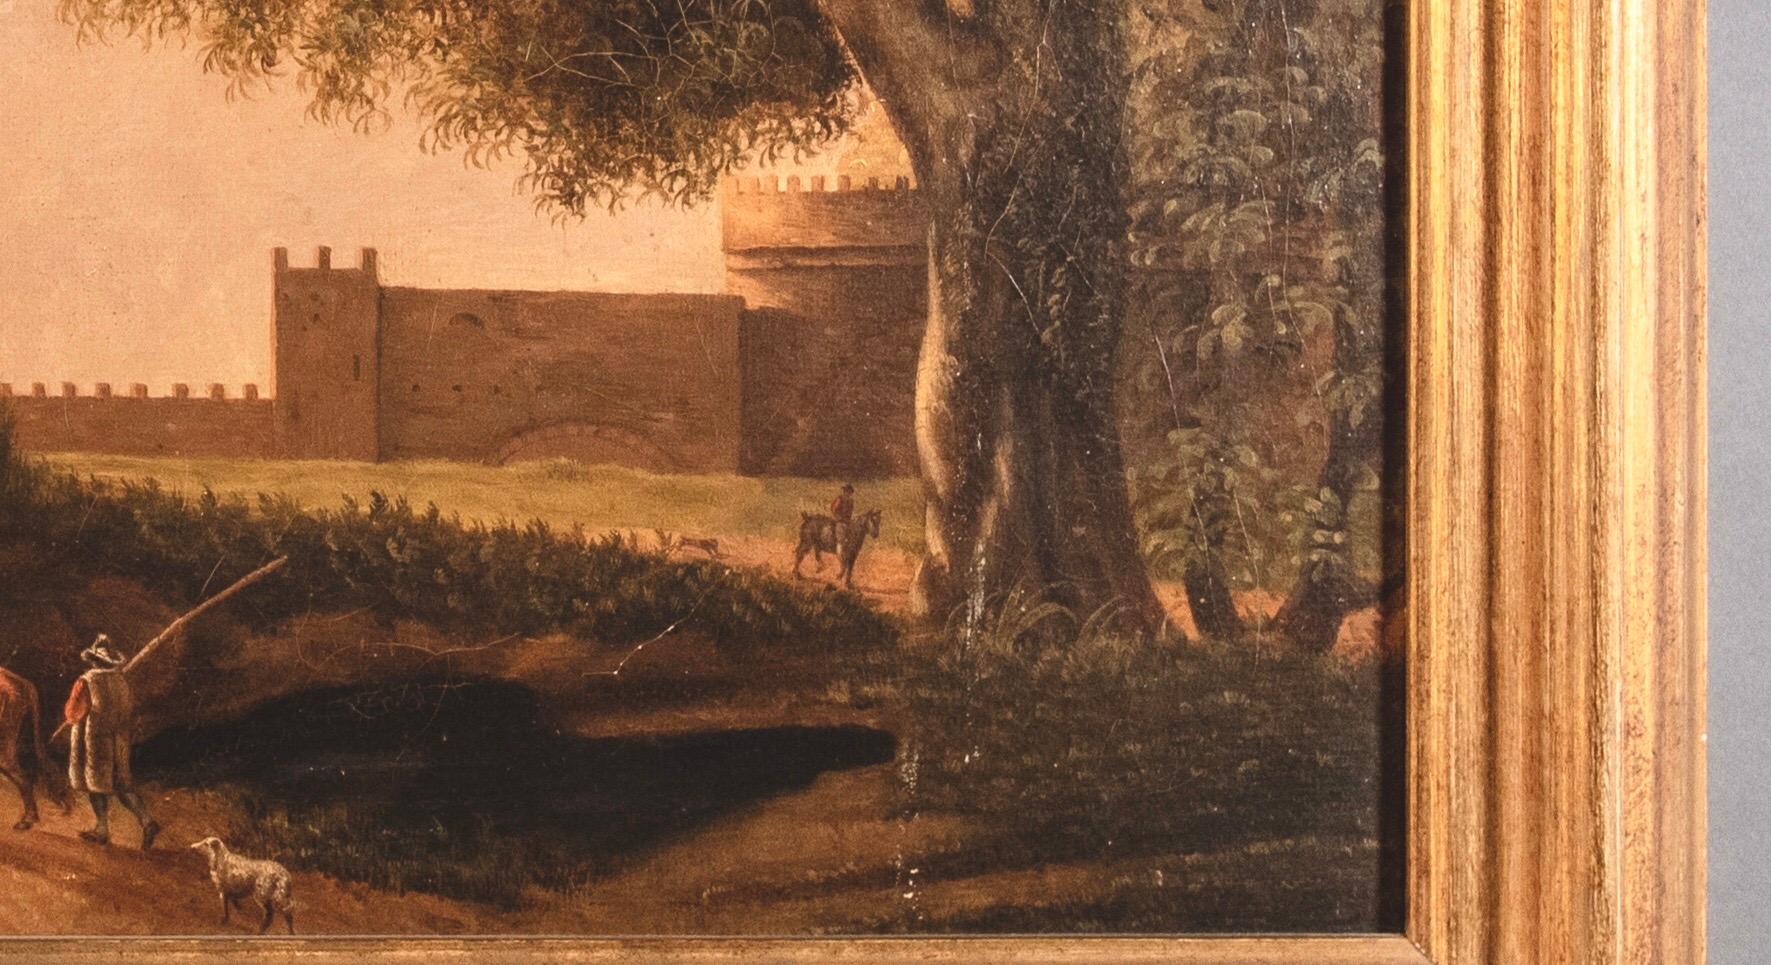 Oil on canvas depicting the landscape of the Roman countryside with figures and Rome in the background.
Our painter is part of the Flemish school active in Rome from the latter 18th Century, circle of Van Lint school.

The painting, which has